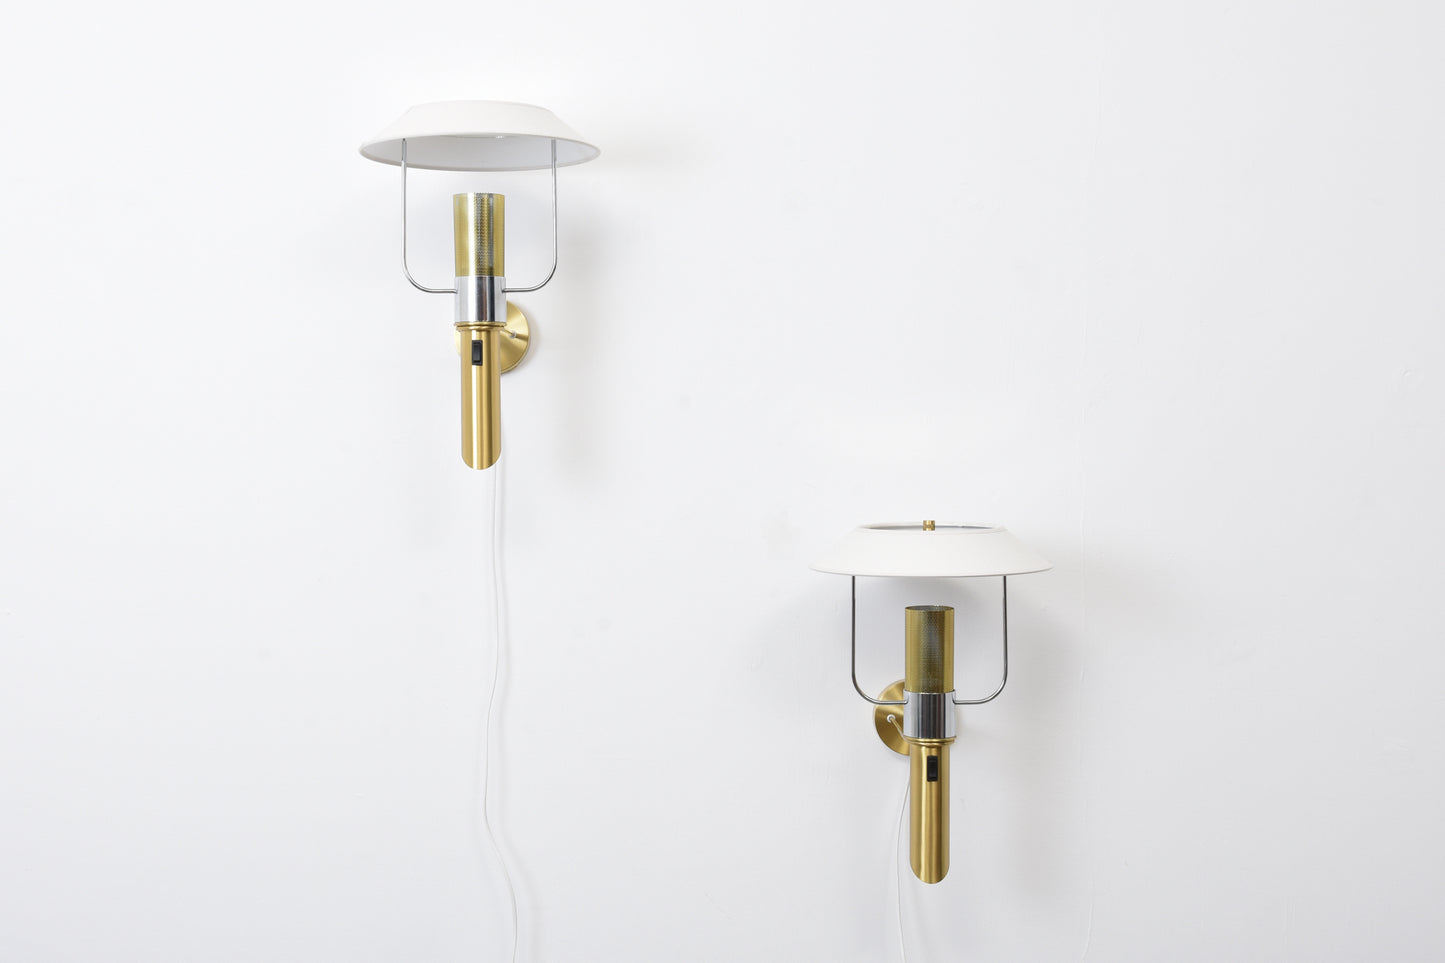 Two available: 1980s wall lights by Örsjö Belysning